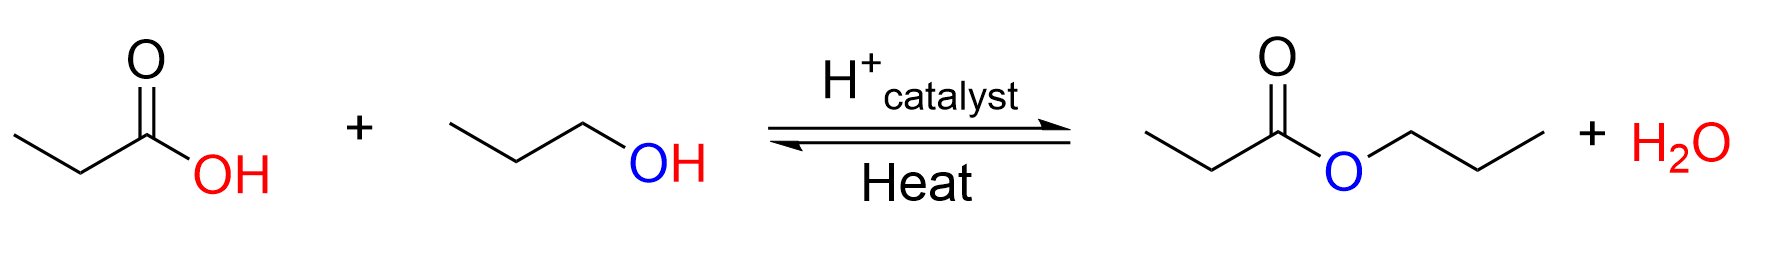 Propanoic acid and propanol in the presence of H+ catalyst forms propyl propanoate and water. Those 2 products in the presence of heat will cause the reverse reaction where propanoic acid and propanol is regenerated.